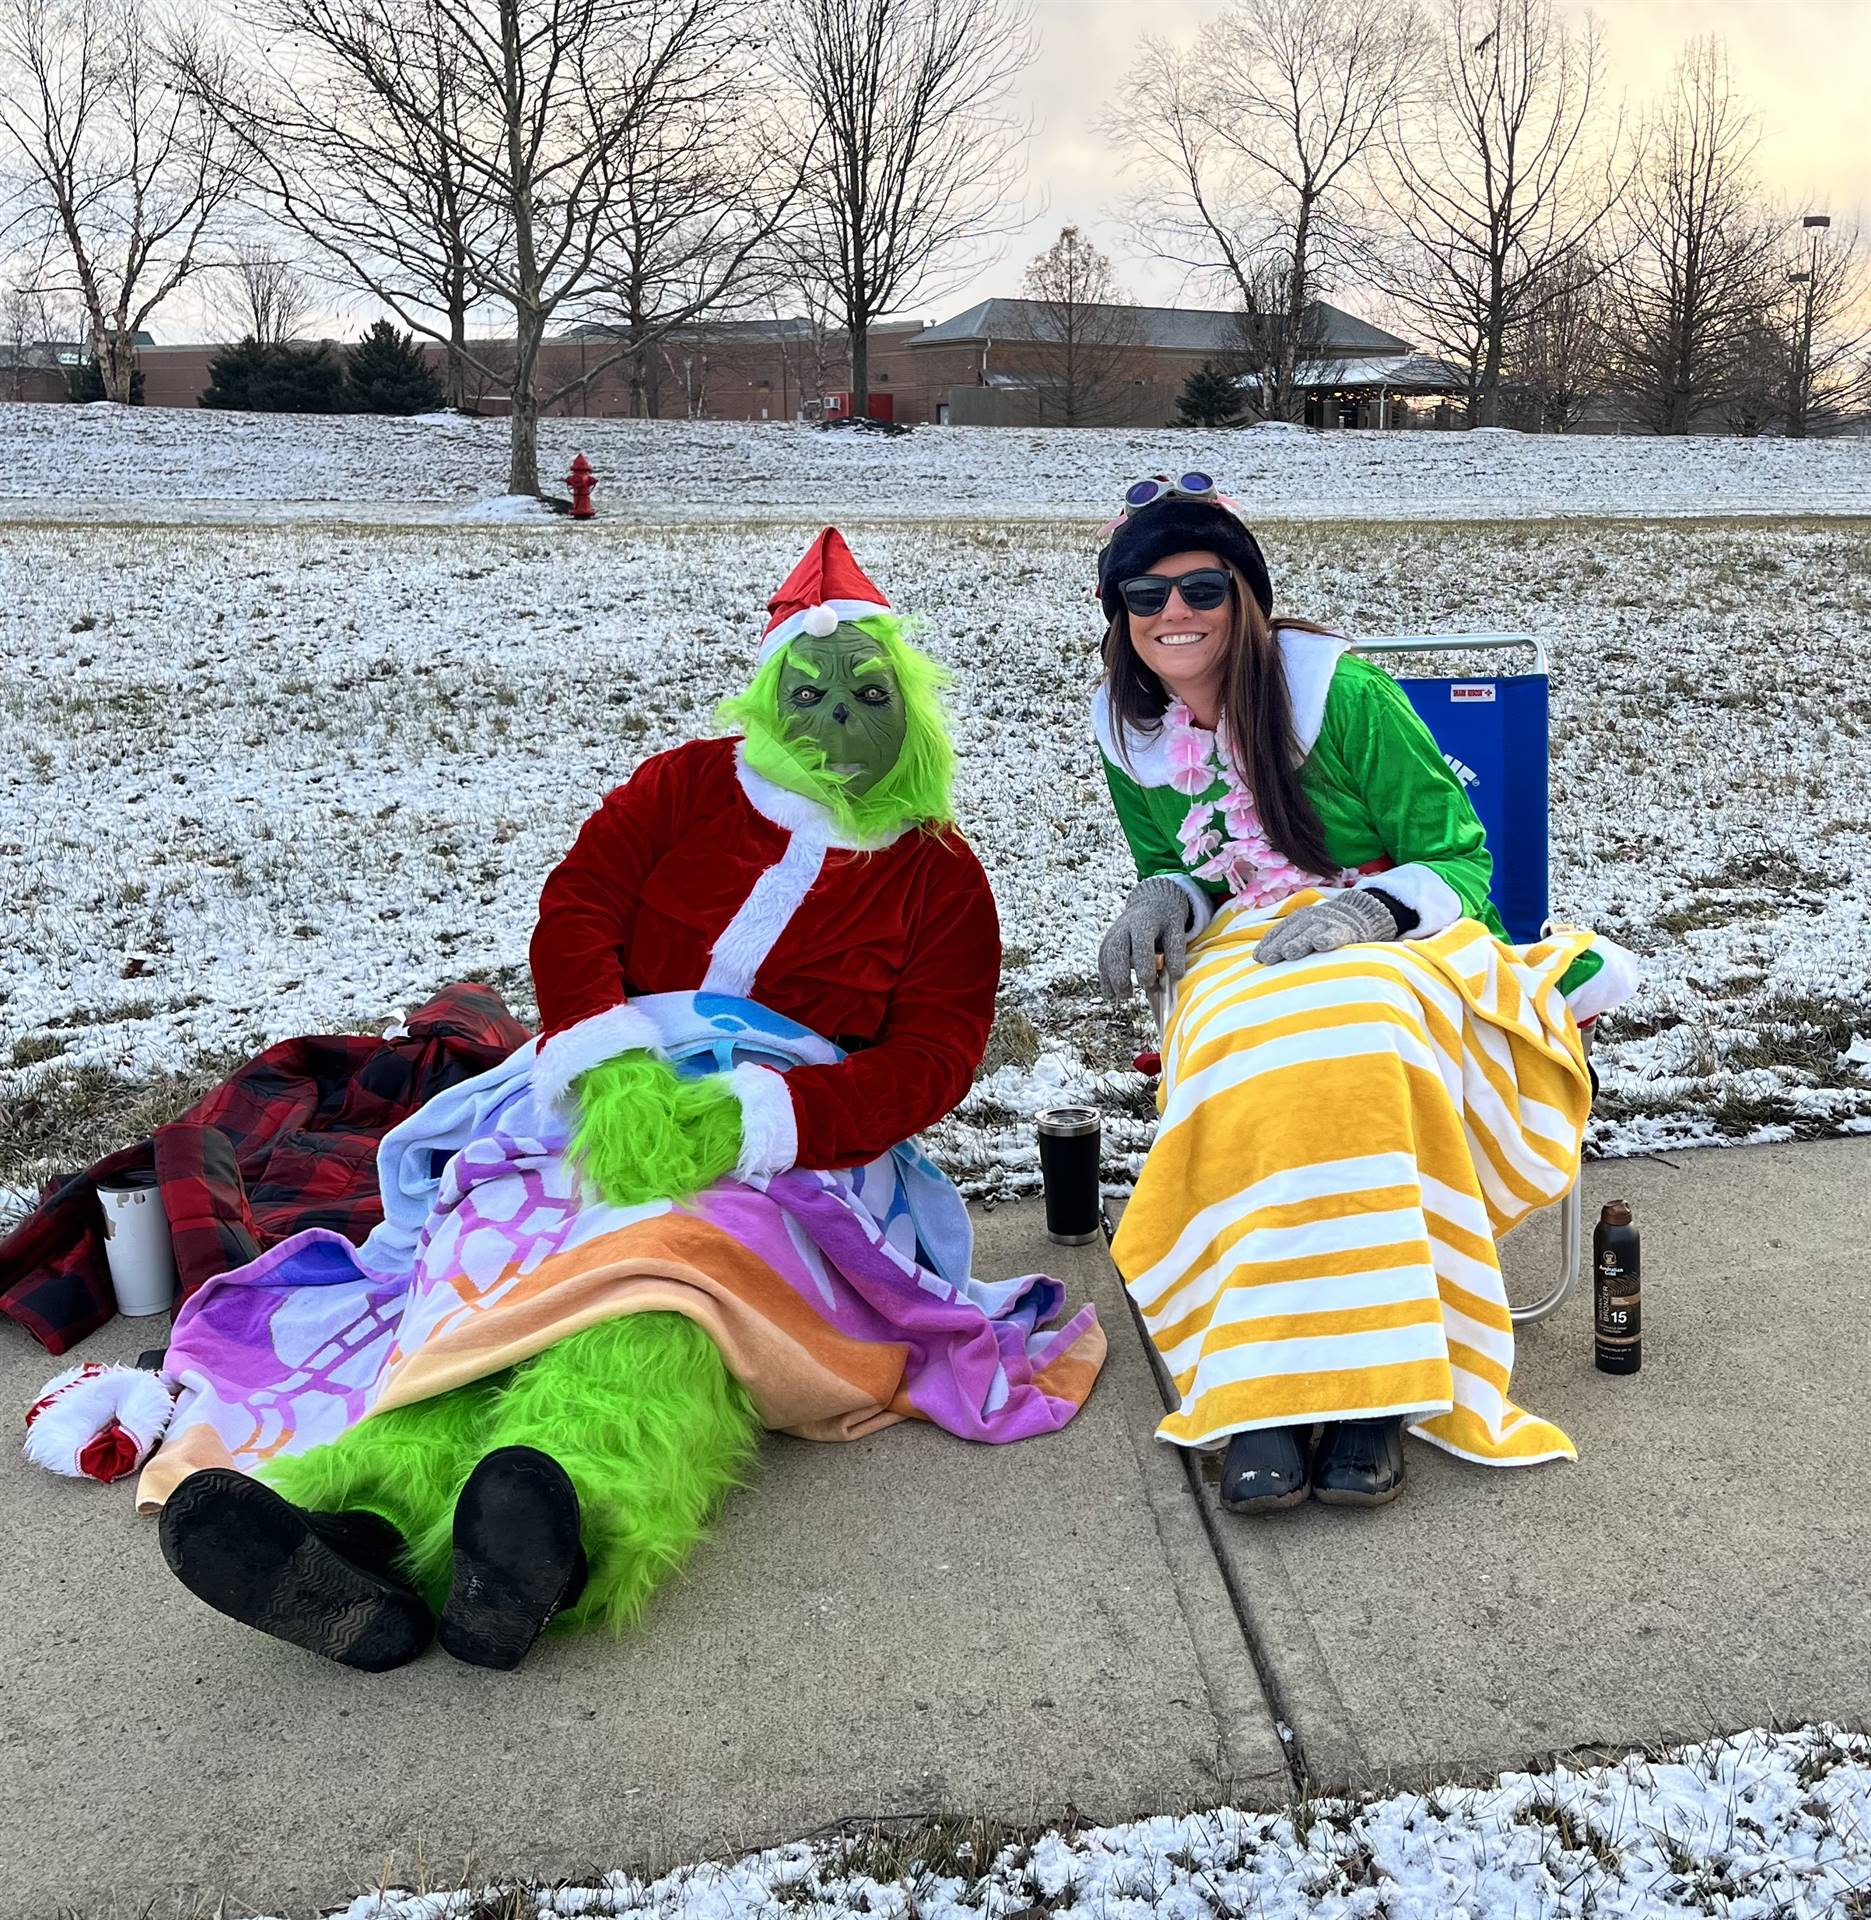 Mrs Crawford dressed as an Elf and the Grinch are sitting in beach chairs with towels greeting kids 